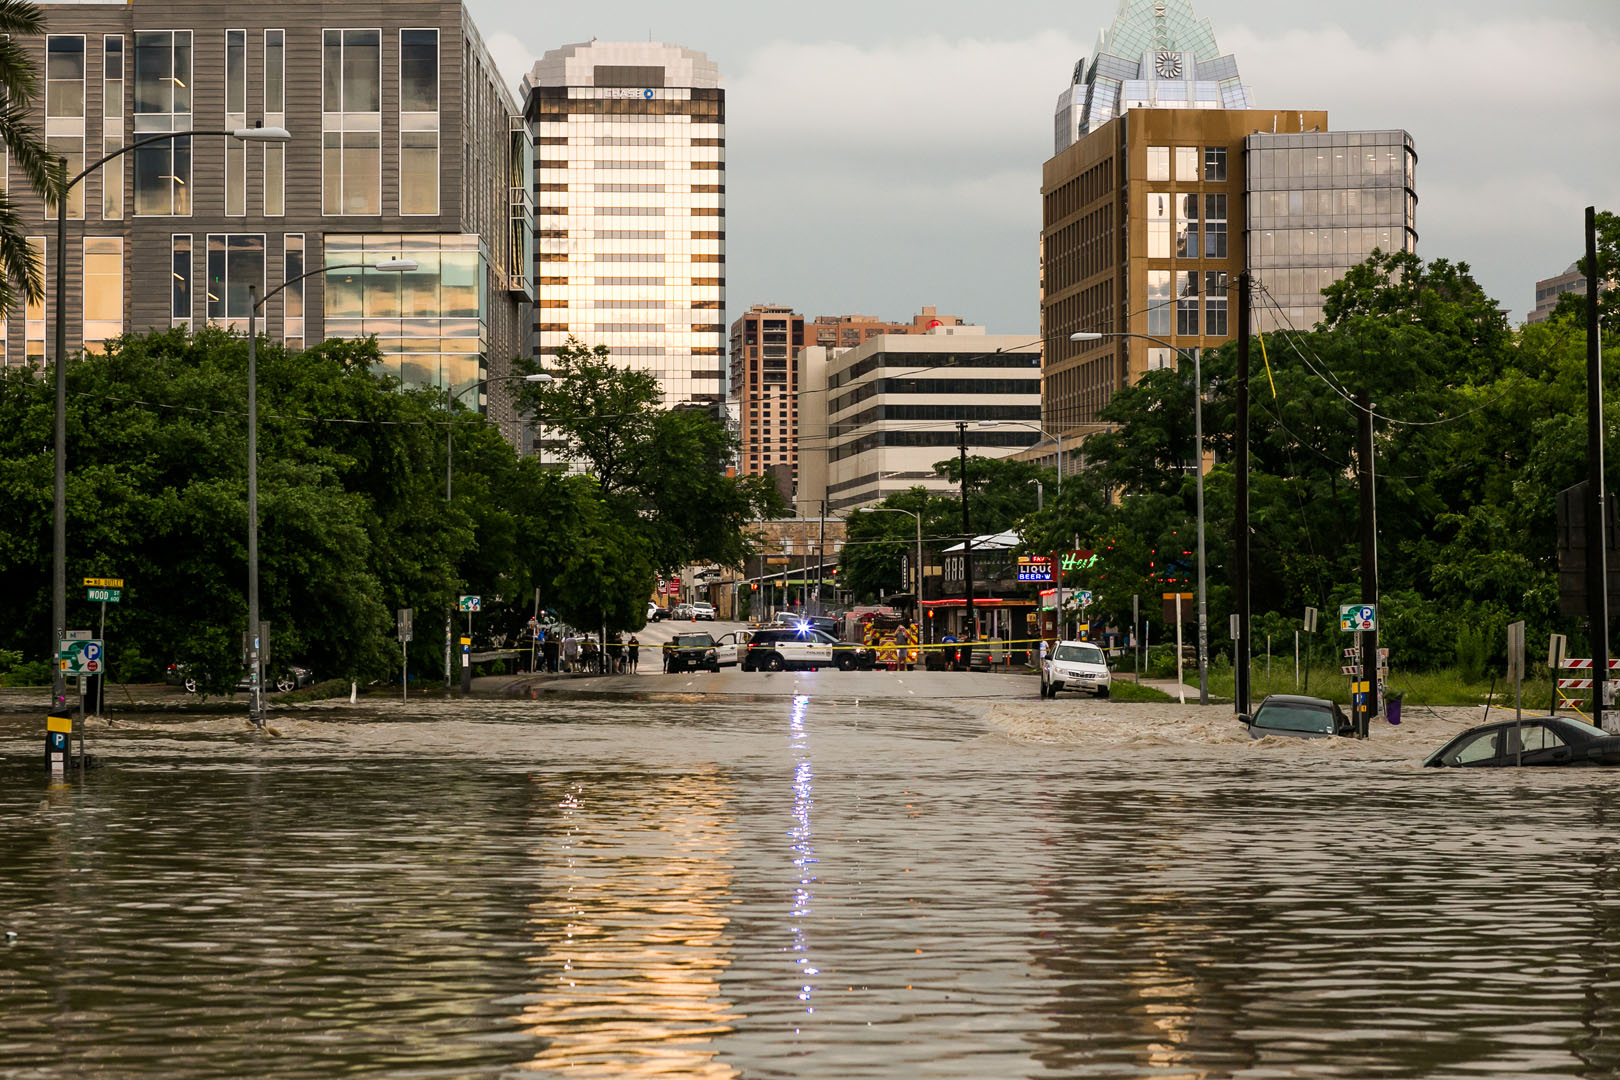 AUSTIN, TX - MAY 25:   Parts of the city are shown inundated after days of heavy rain on May 25, 2015 in Austin, Texas. Texas Gov. Greg Abbott toured the damage zone where one person is confirmed dead and at least 12 others missing in flooding along the Rio Blanco, which reports say rose as much as 40 feet in places, caused by more than 10 inches of rain over a four-day period. The governor earlier declared a state of emergency in 24 Texas counties.  (Photo by Drew Anthony Smith/Getty Images)